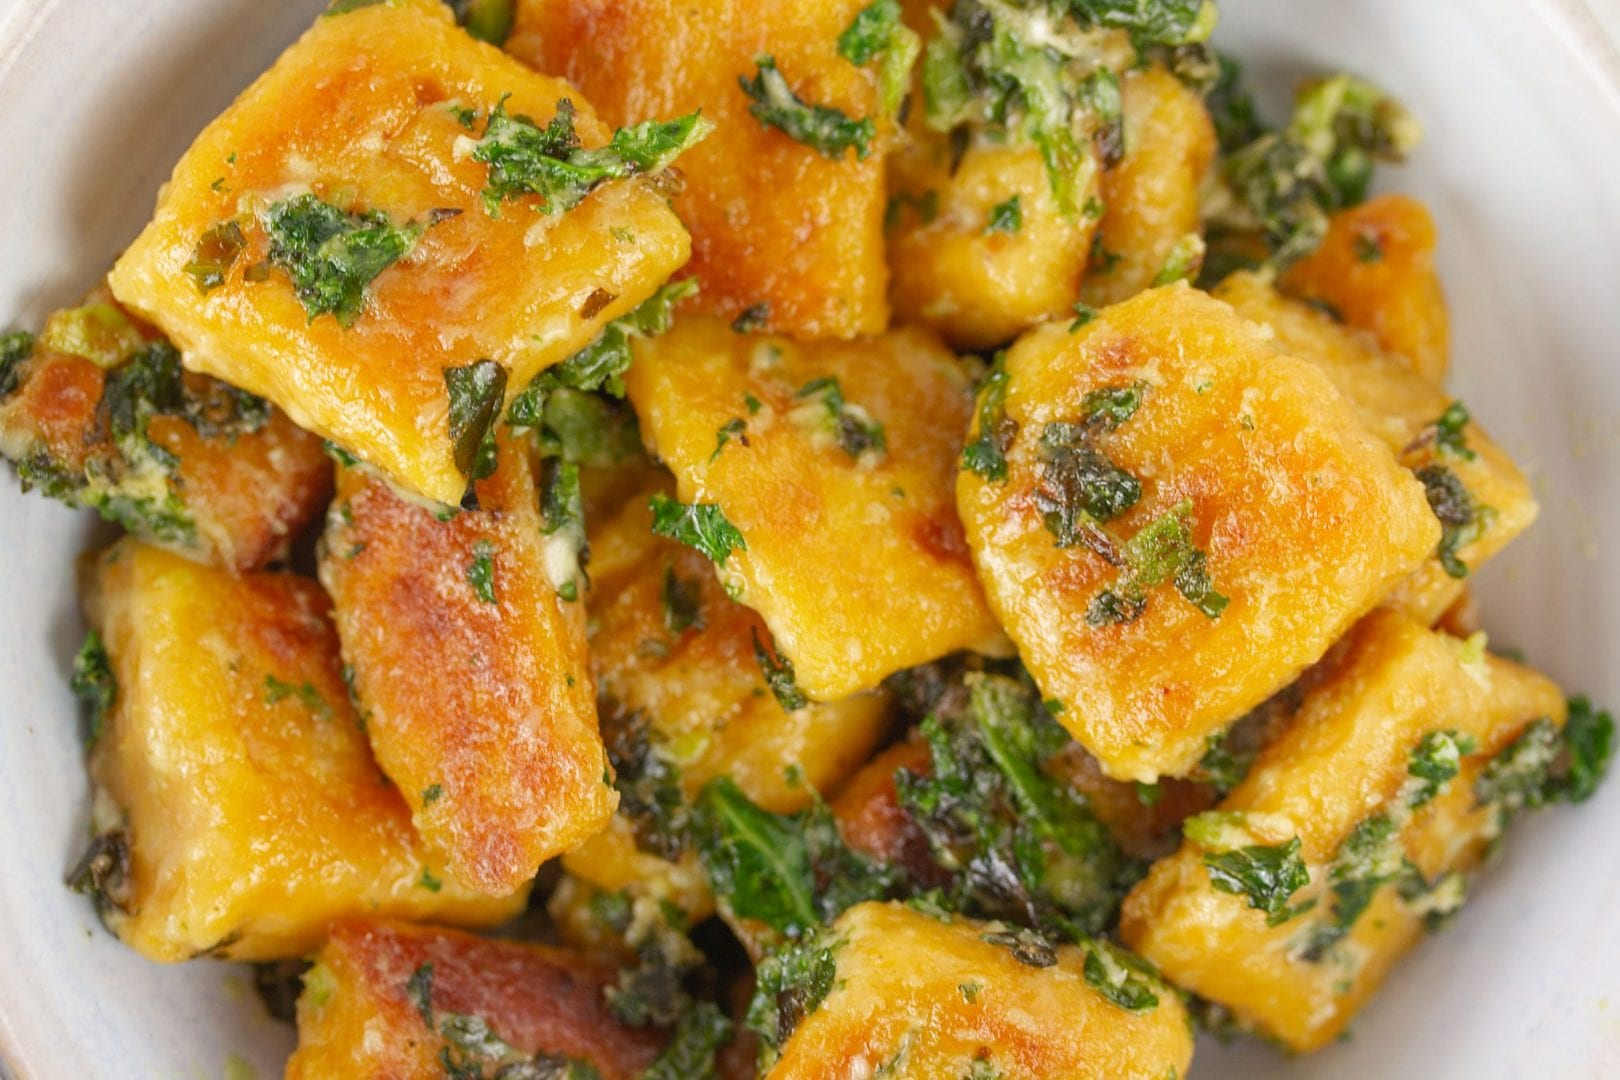 Sweet potato gnocchi - try this tasty and healthy vegetarian dish for a healthy kids dinner